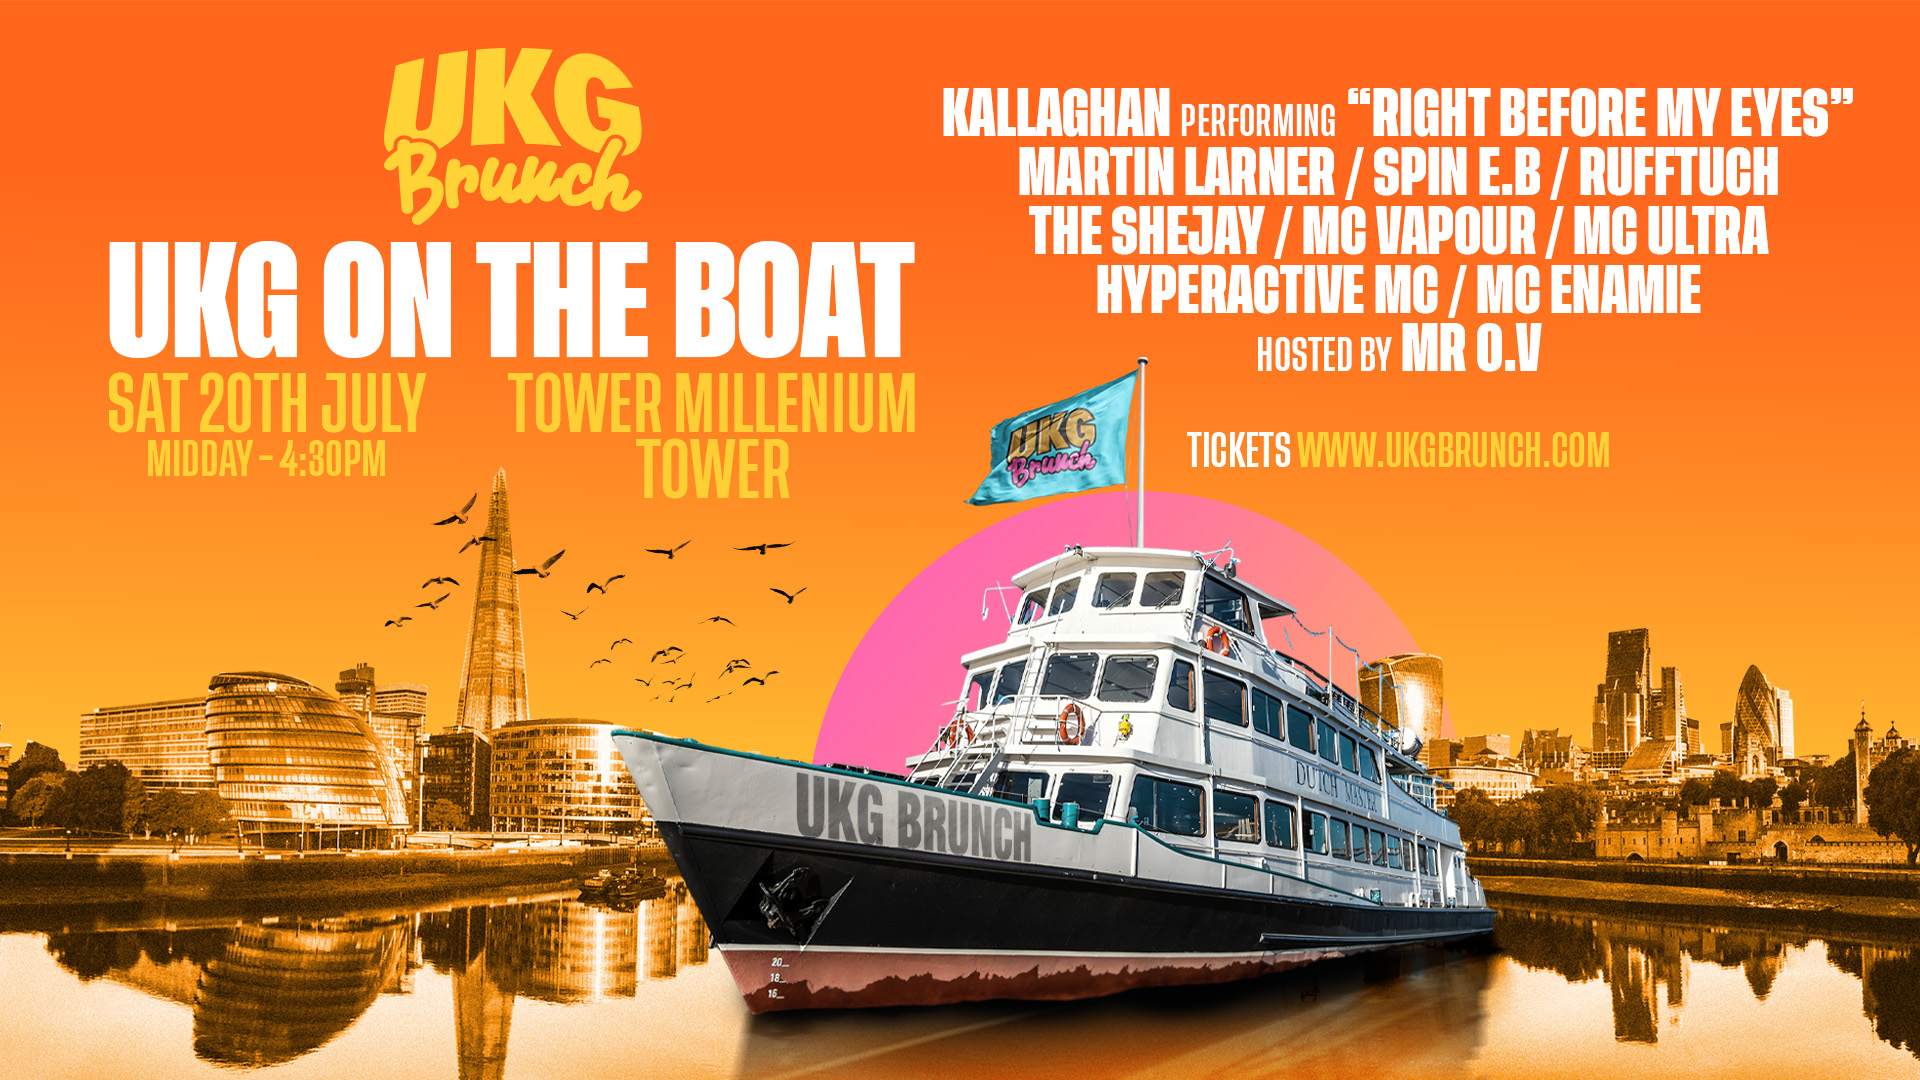 UKG ON THE BOAT (20TH JULY) - Página frontal